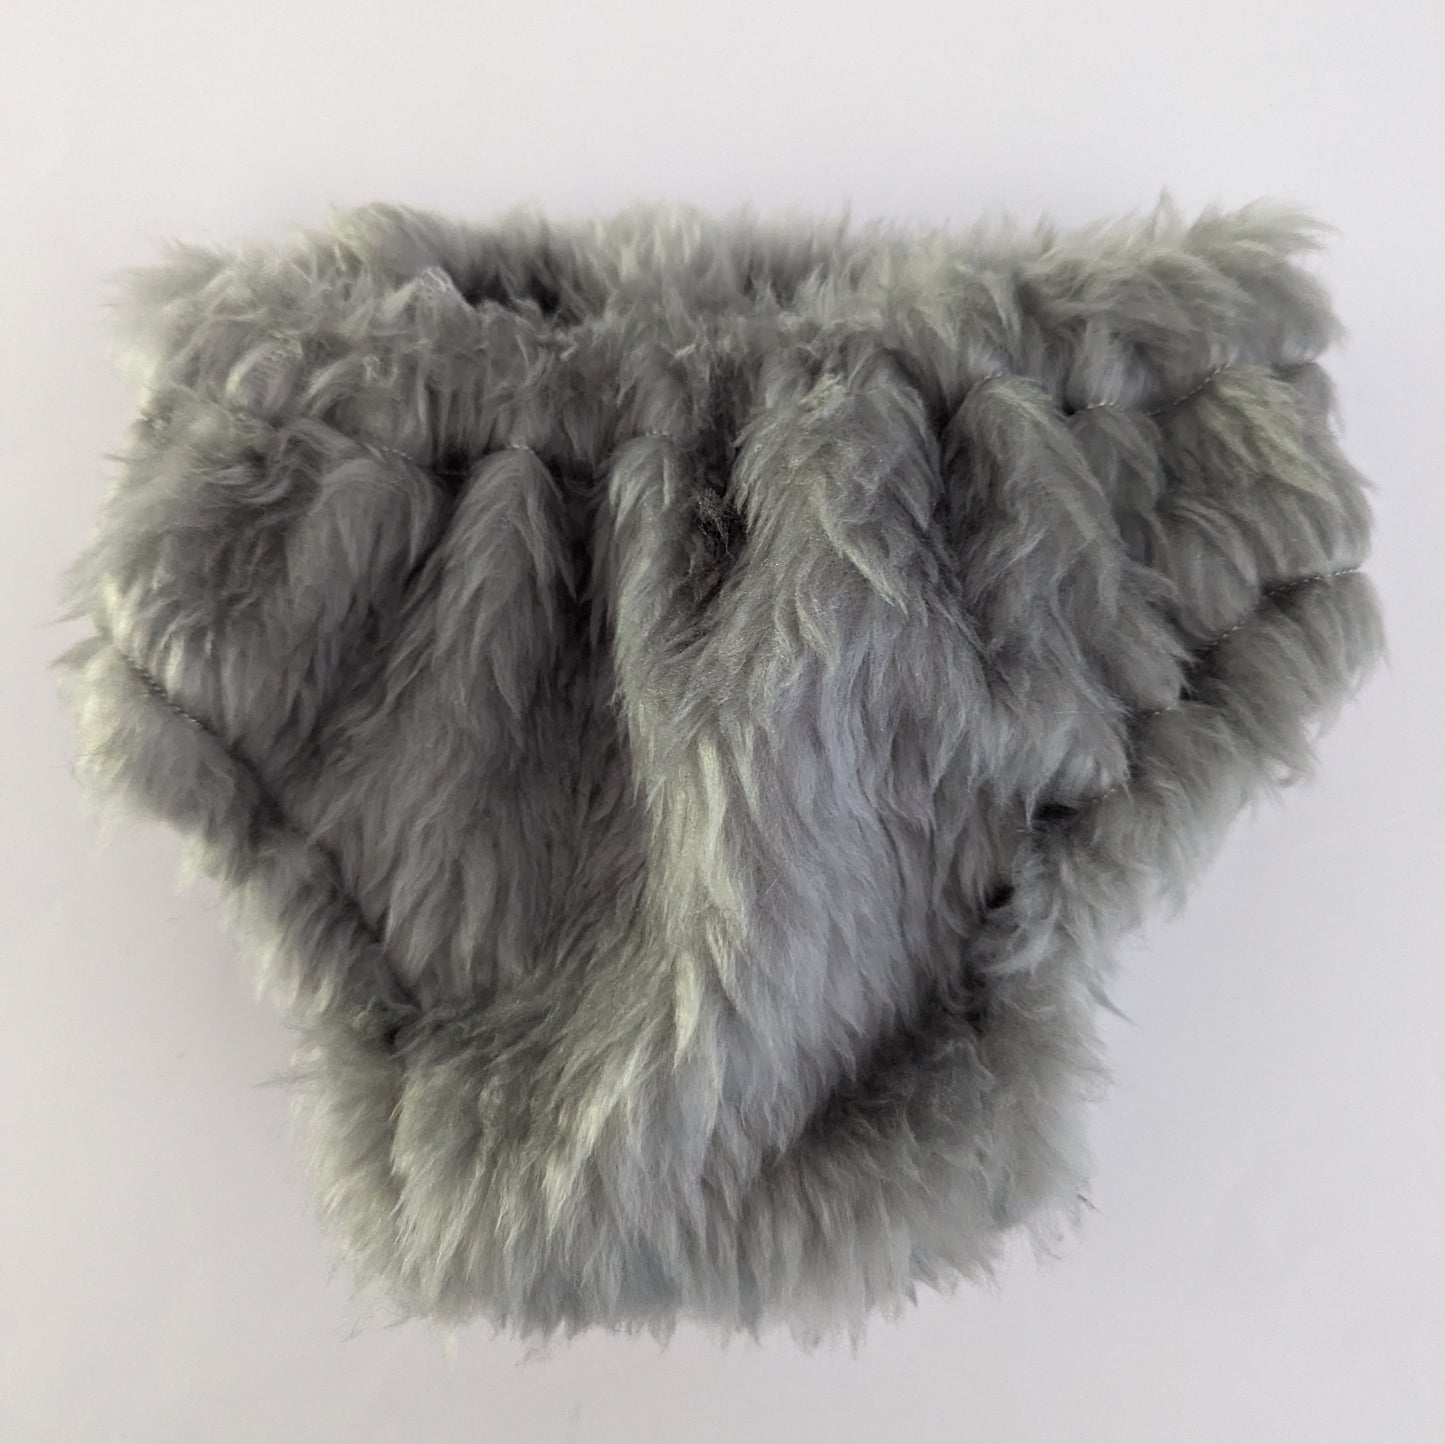 FAUX FUR - GREY - Fake Animal Hair Baby Nappy Cover, Size 1 (12-24 months)